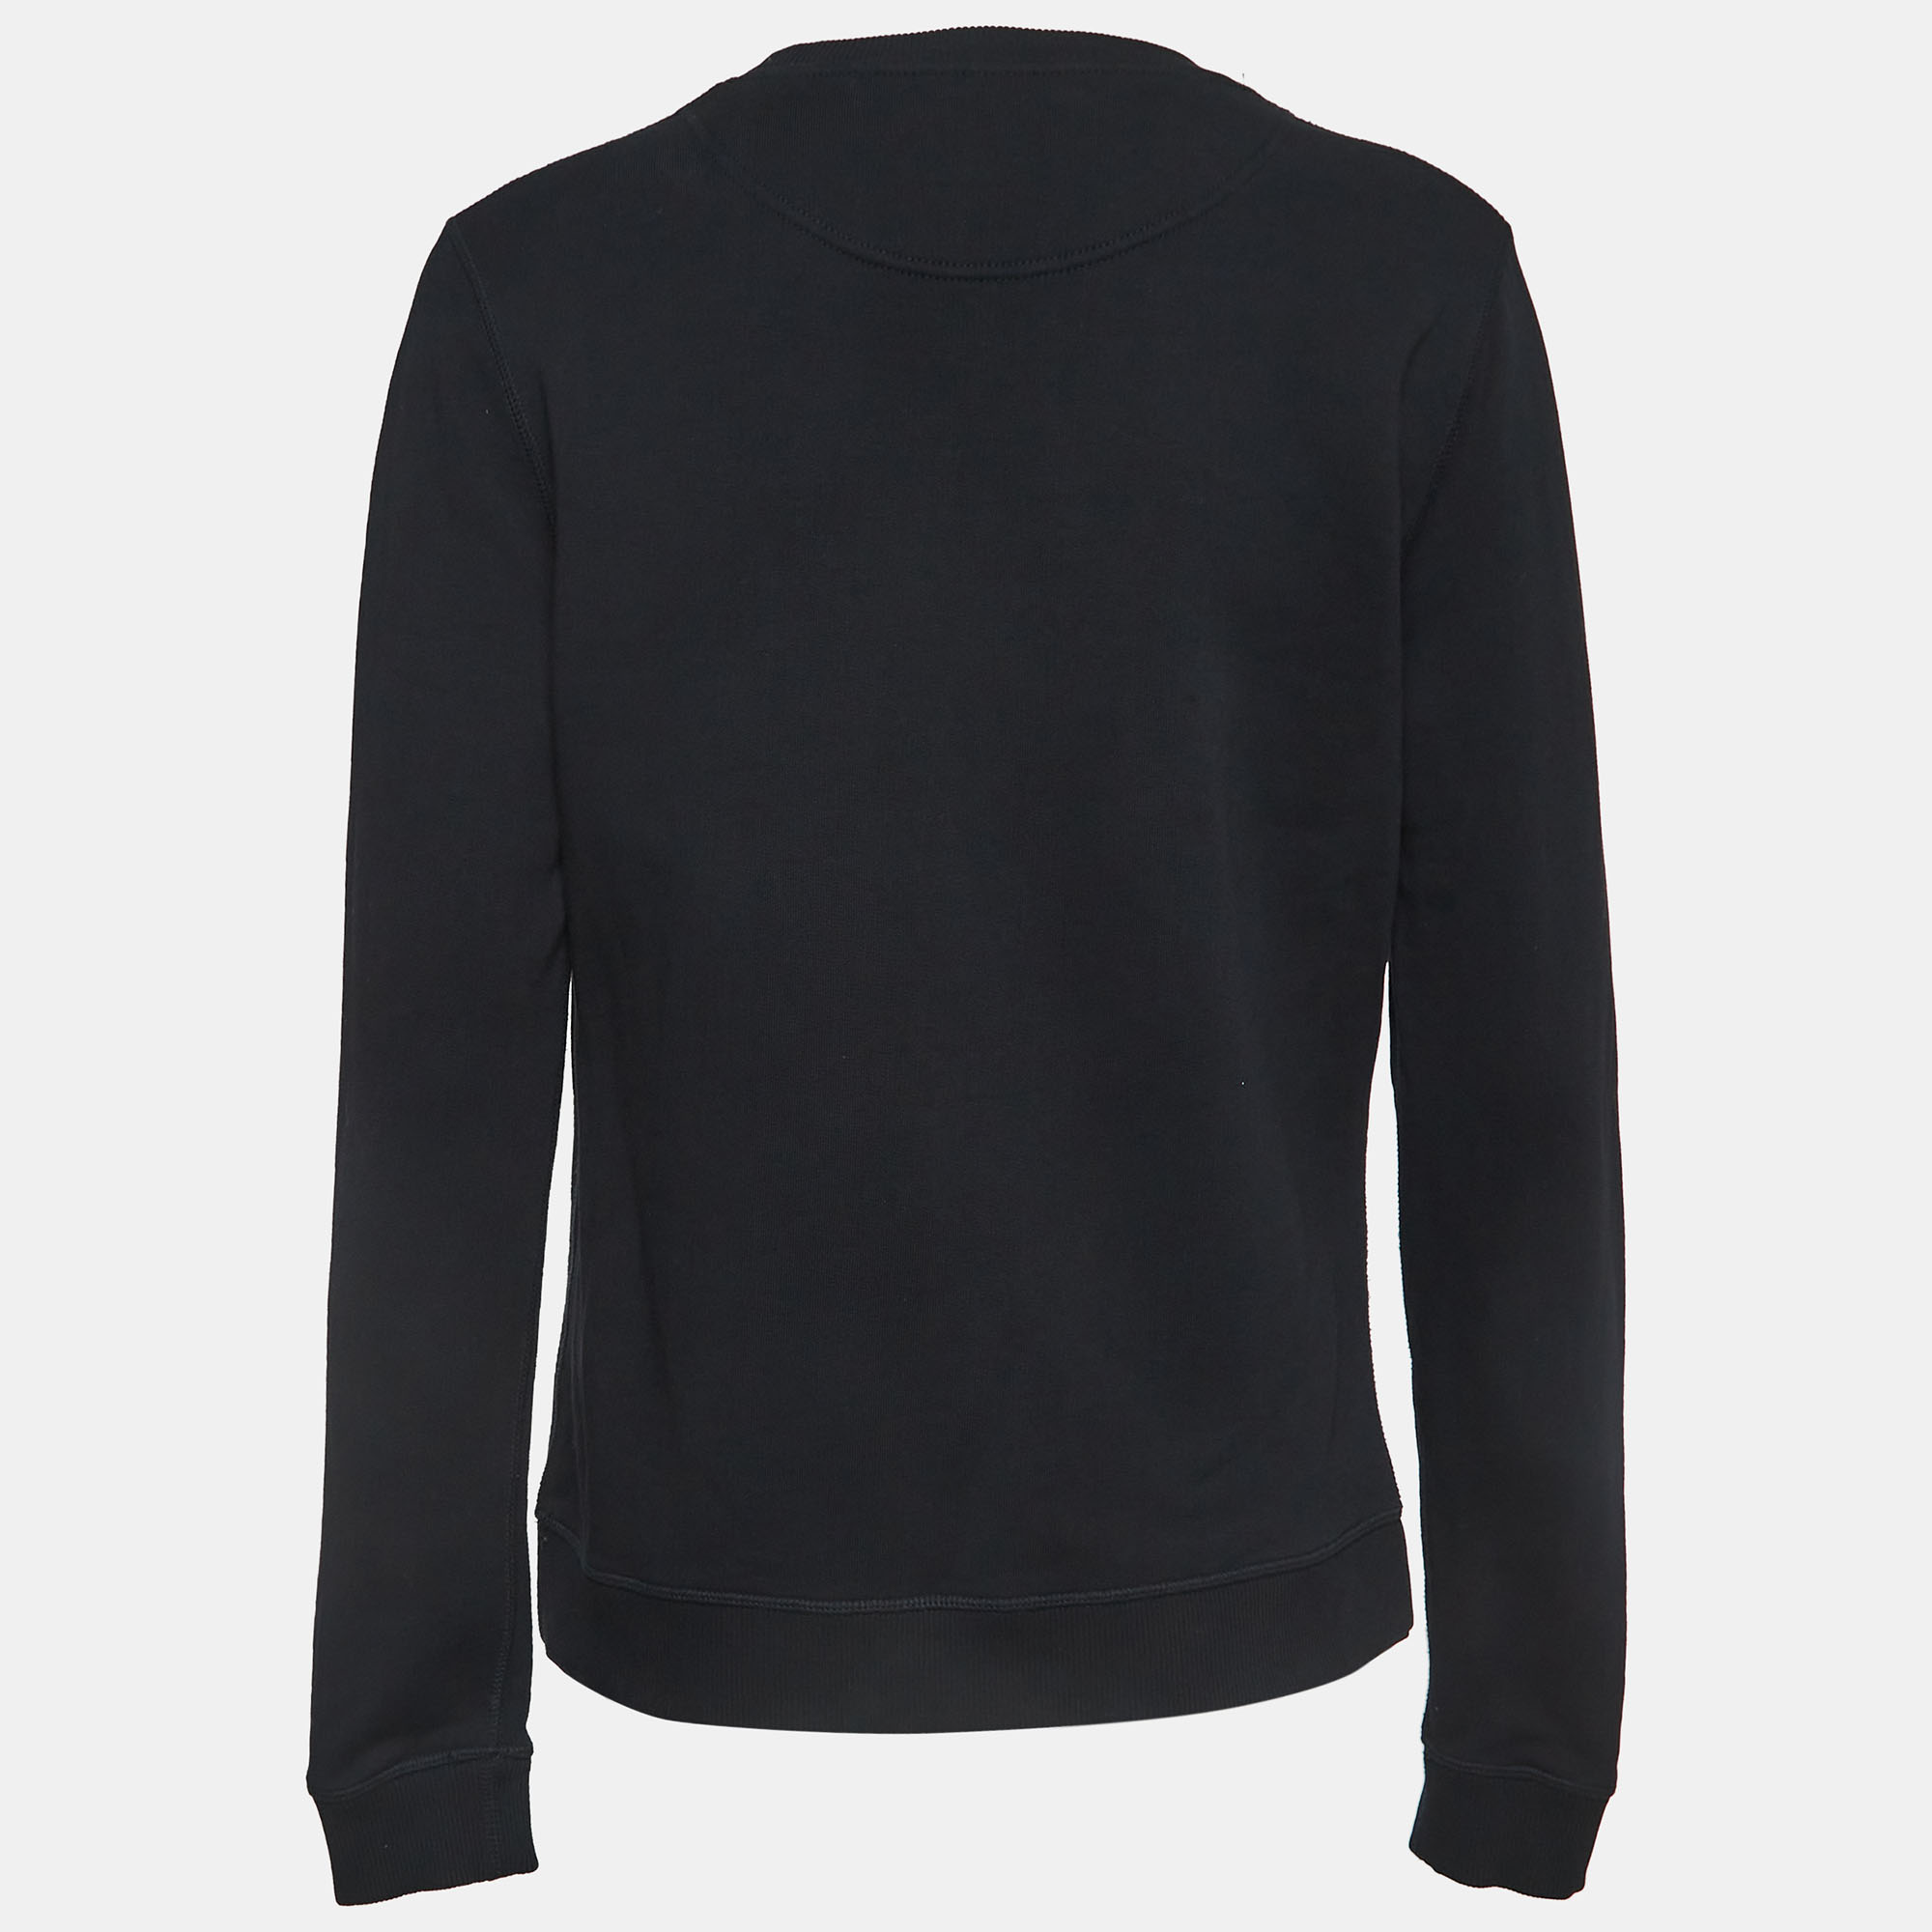 

Kenzo Black Eye Embroidered Cotton Knit Relaxed Sweatshirt